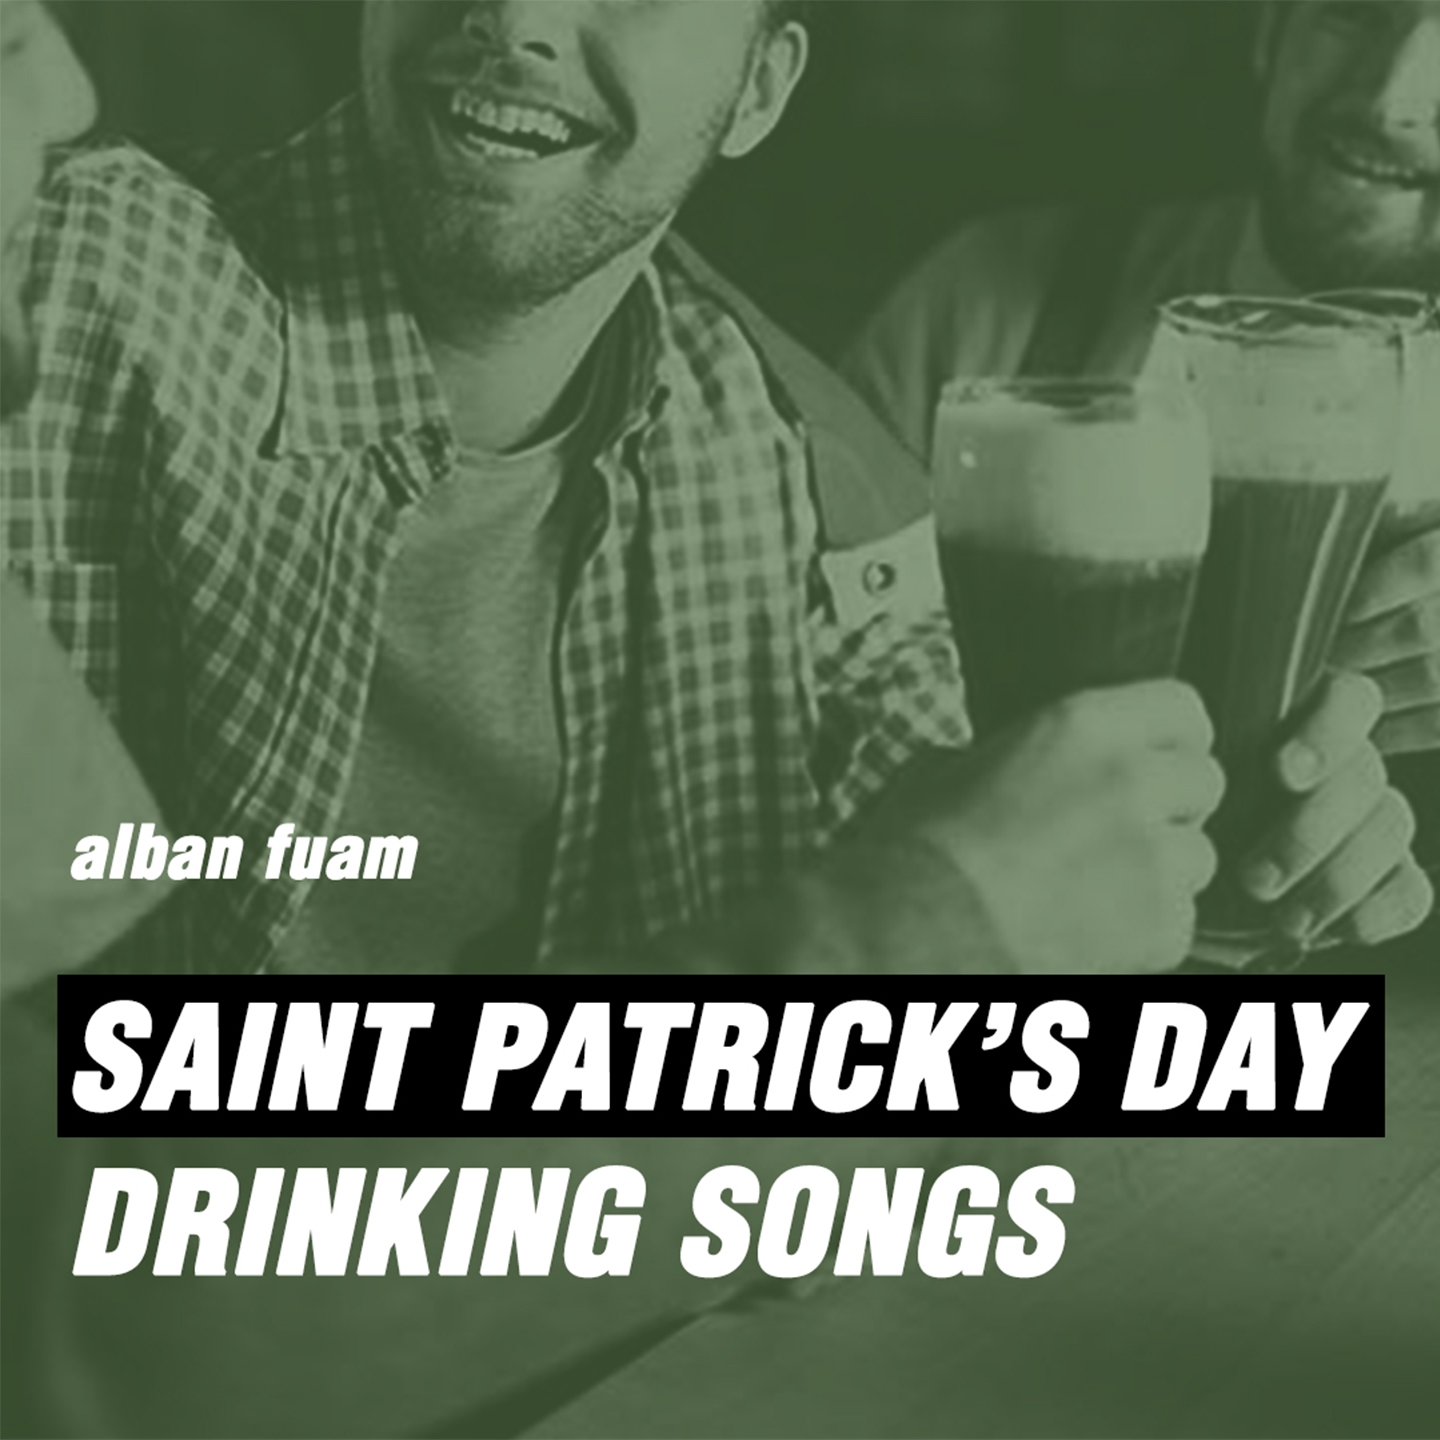 Saint Patrick's Day Drinking Songs